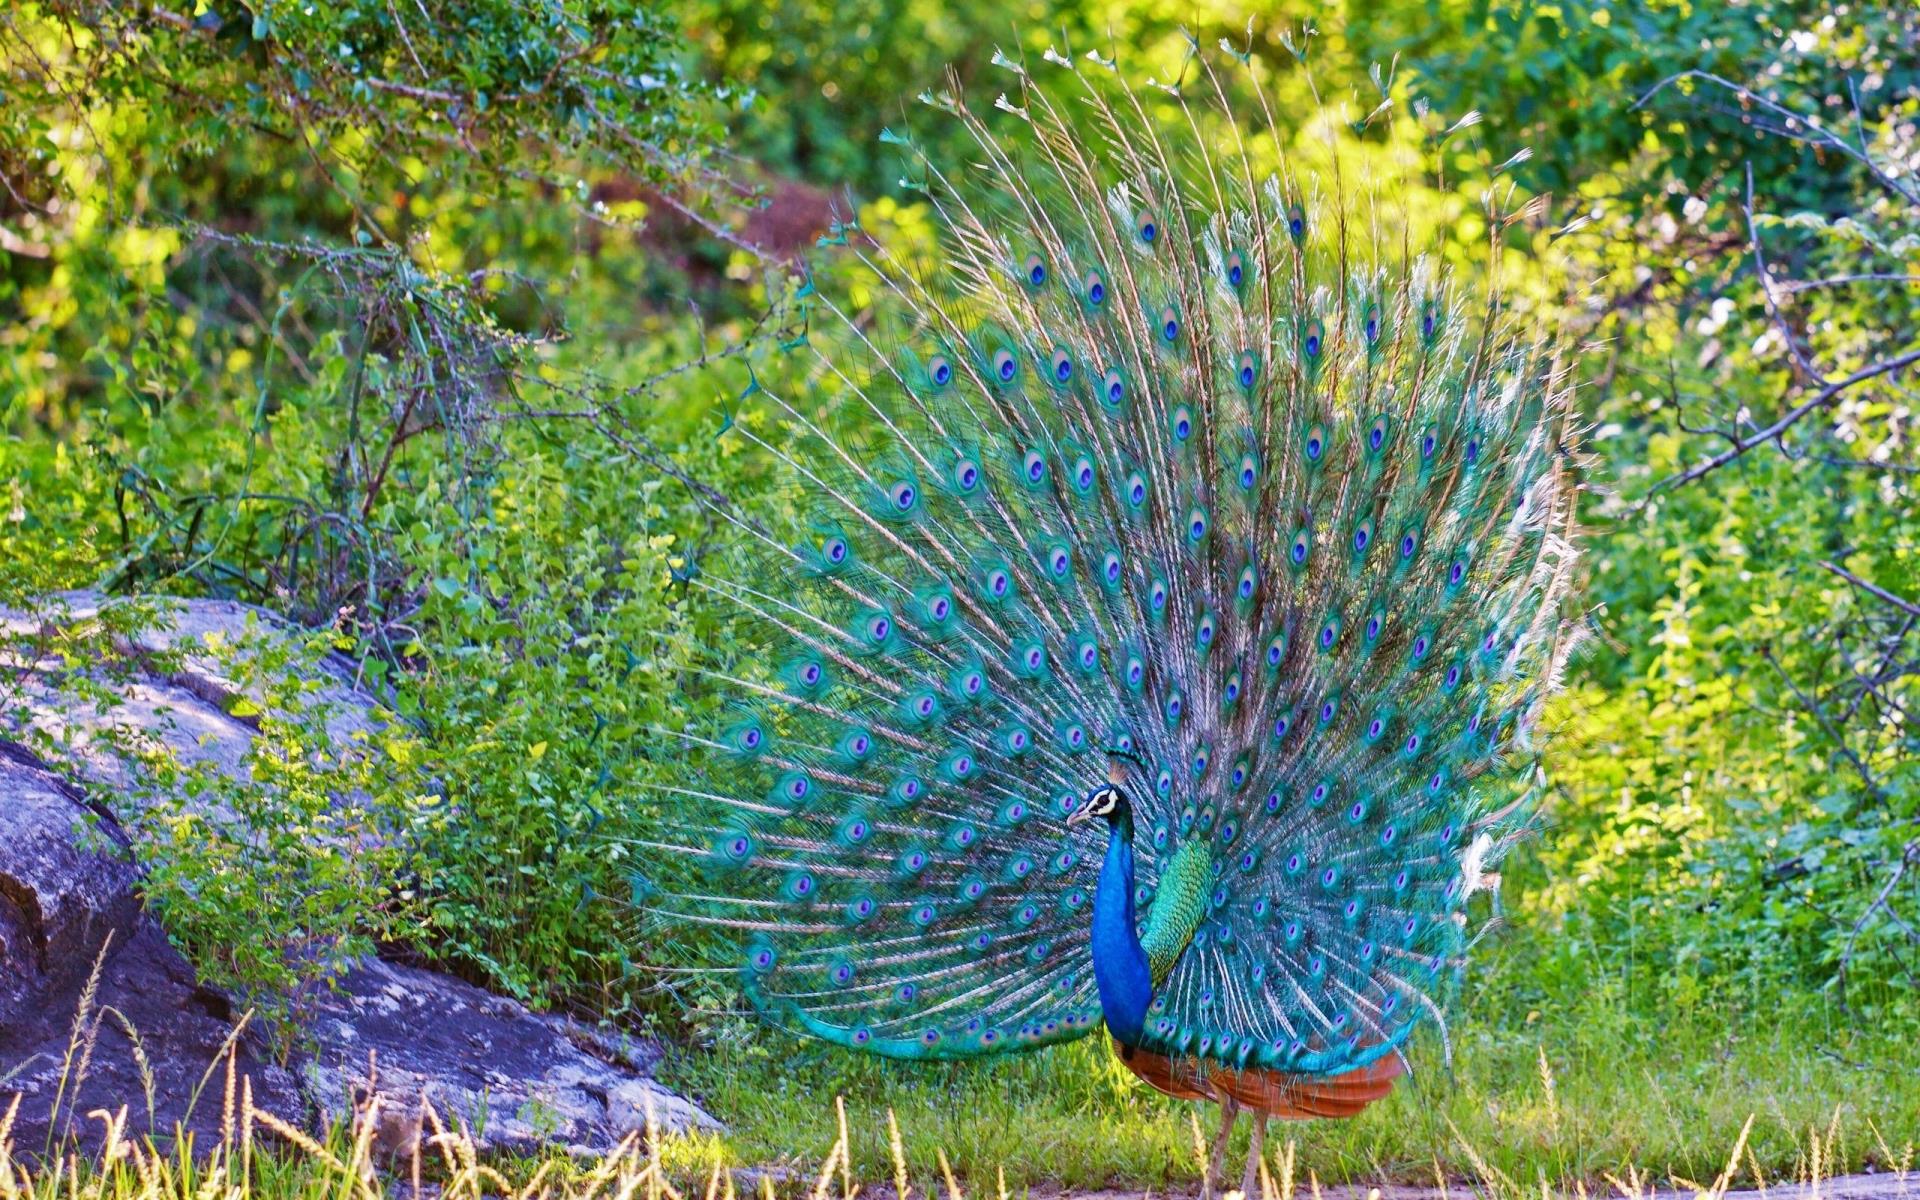 peacock hd images